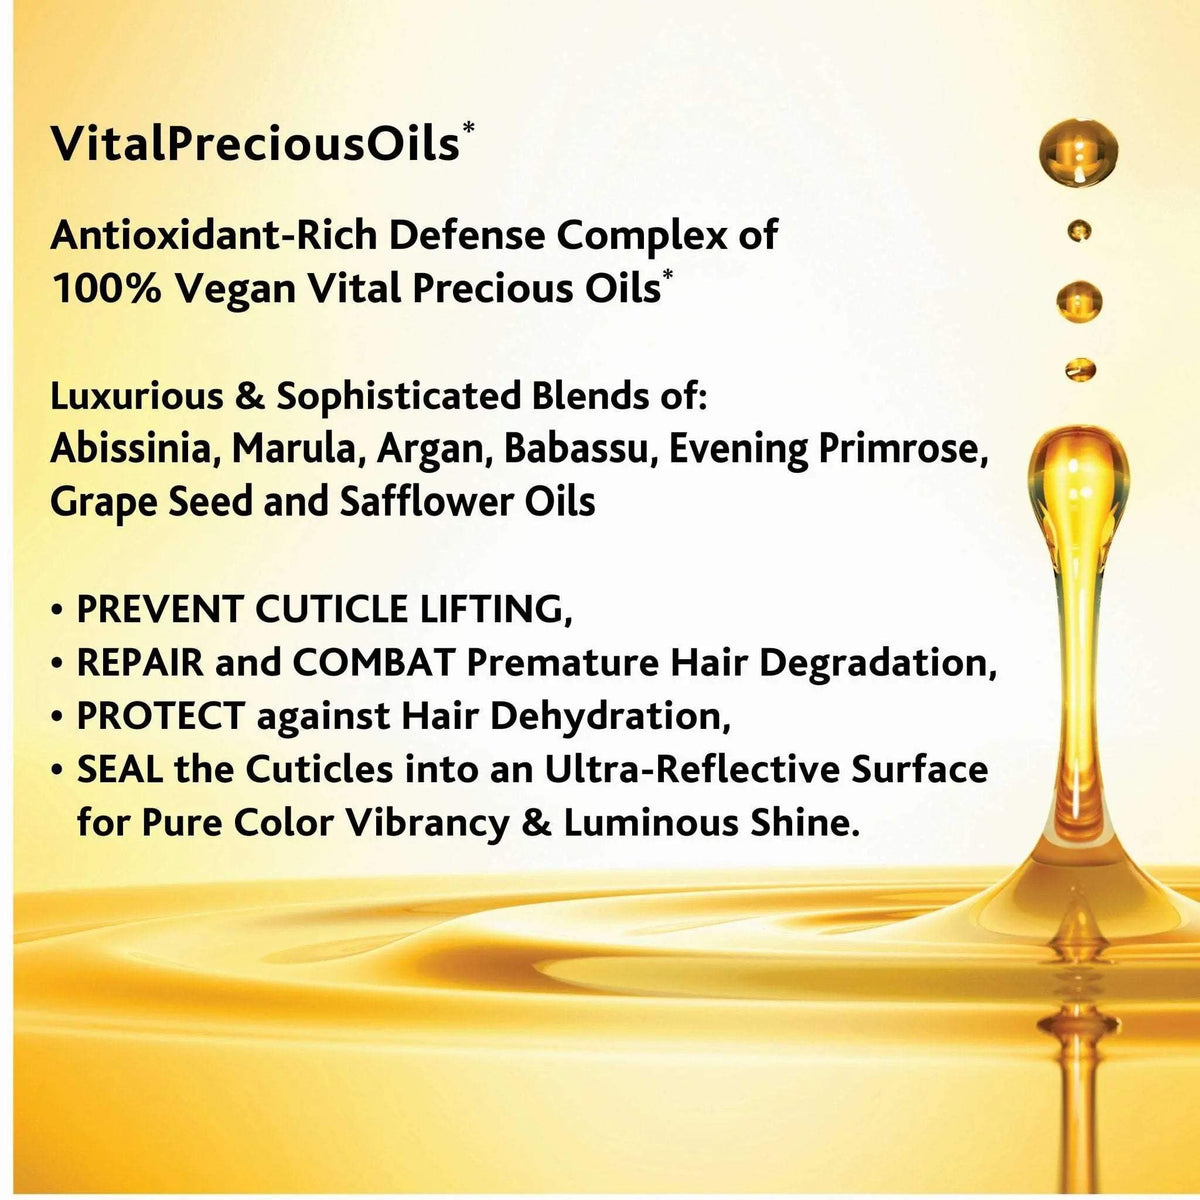 STRONGFORCE VITAL PRECIOUS OILS - 45 CAPSULES PhytoVEGAN Super Concentrated Intensive Leave-In Hair Oil - SNOBGIRLS.com